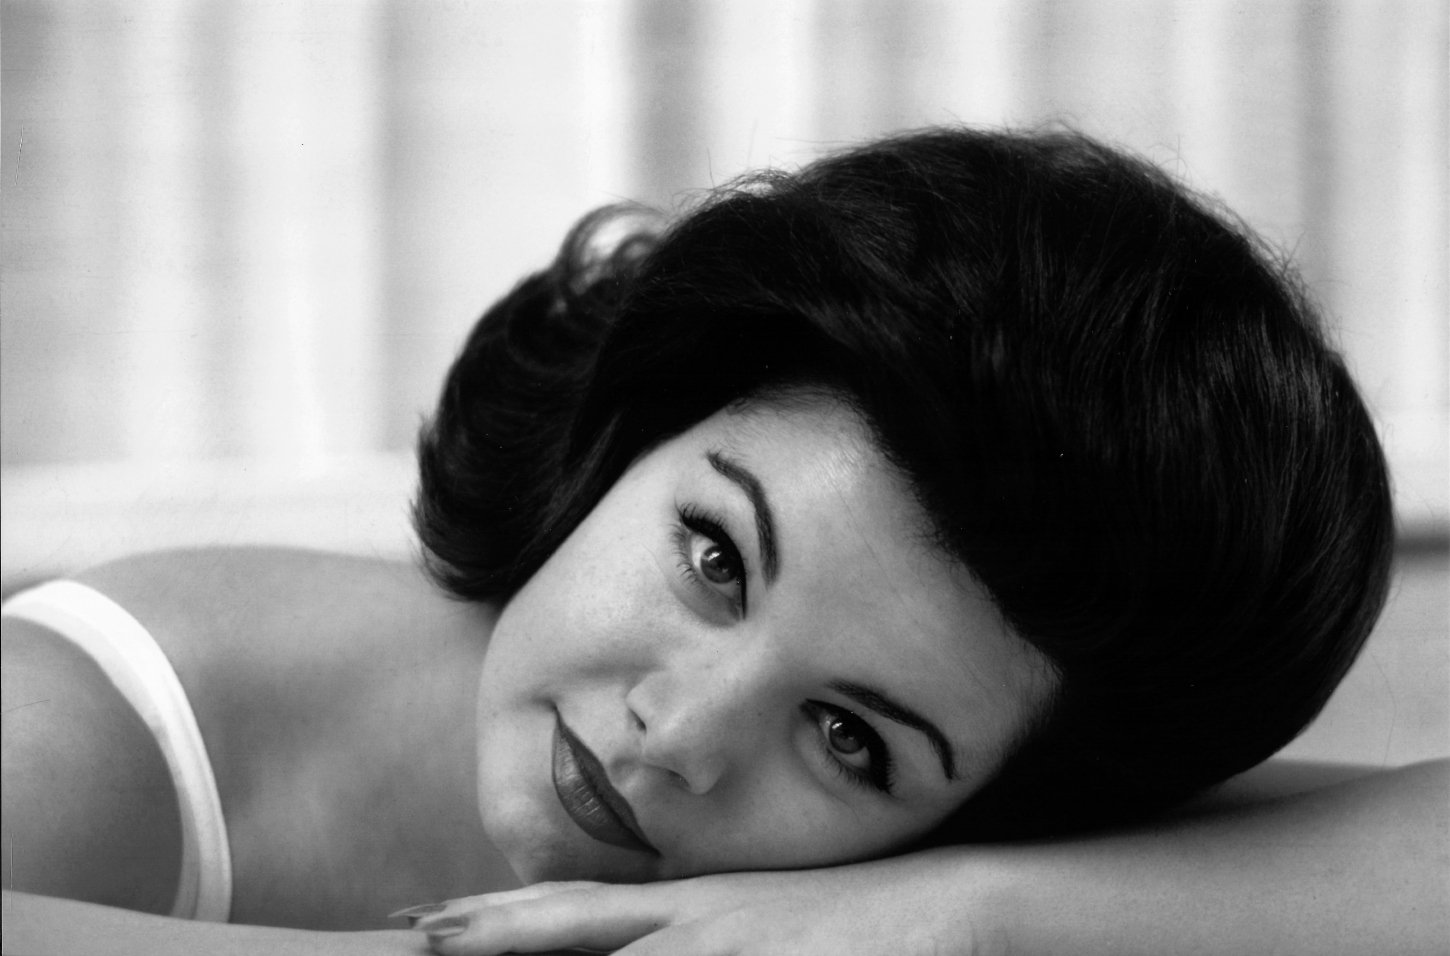 Of annette funicello photos Annette Funicello's